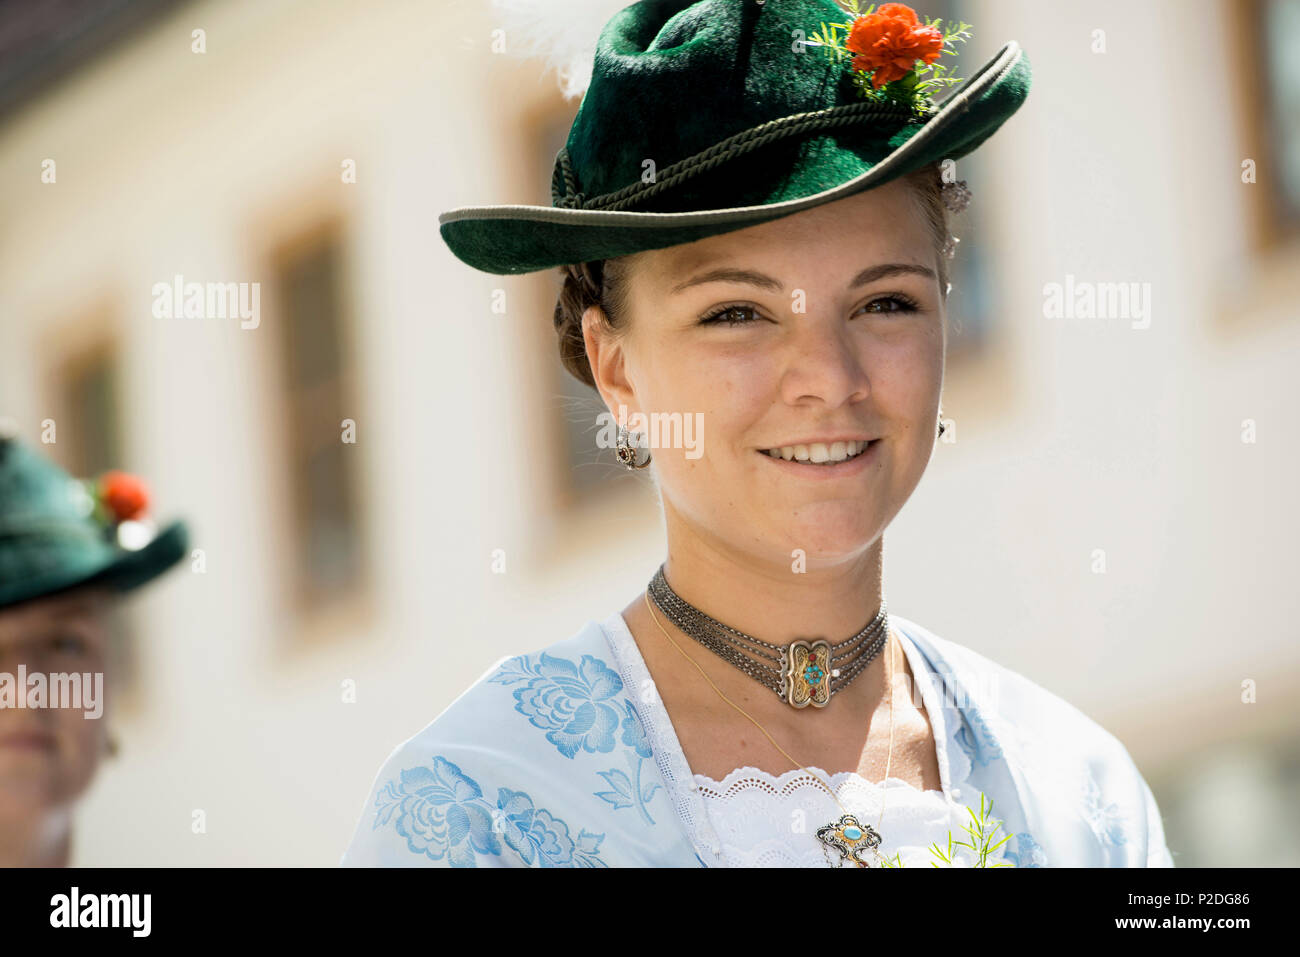 Woman wearing traditional clothes, traditional procession, Garmisch-Partenkirchen, Bavaria, Germany Stock Photo